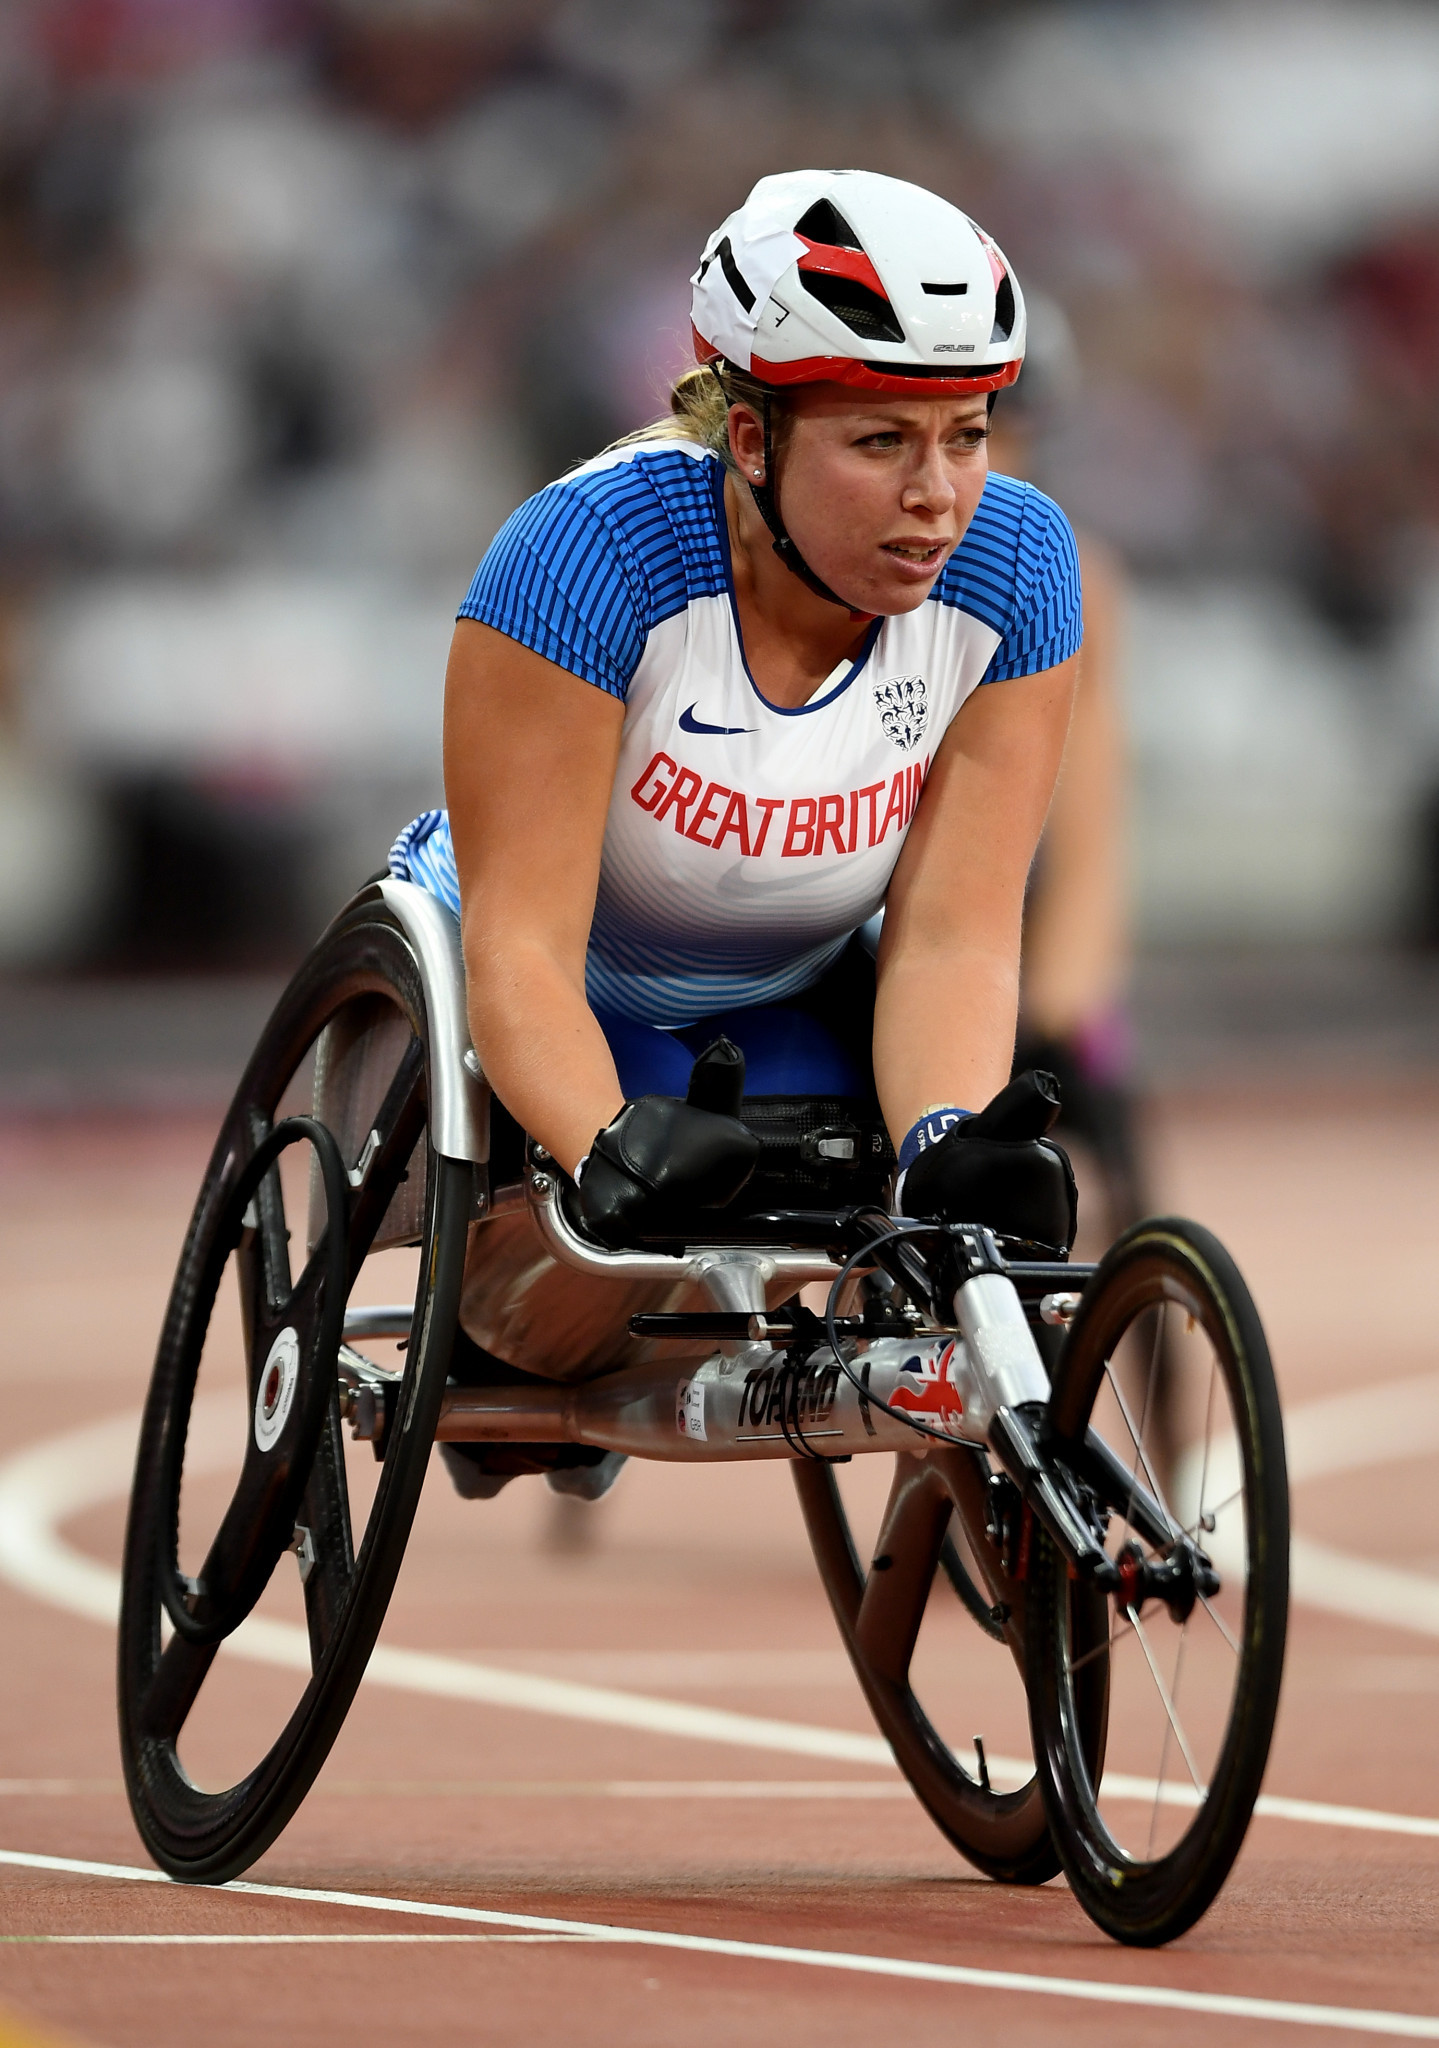 Great Britain's Hannah Cockroft increased her gold medal tally to four with victory in the women's 400m T34 event ©Getty Images